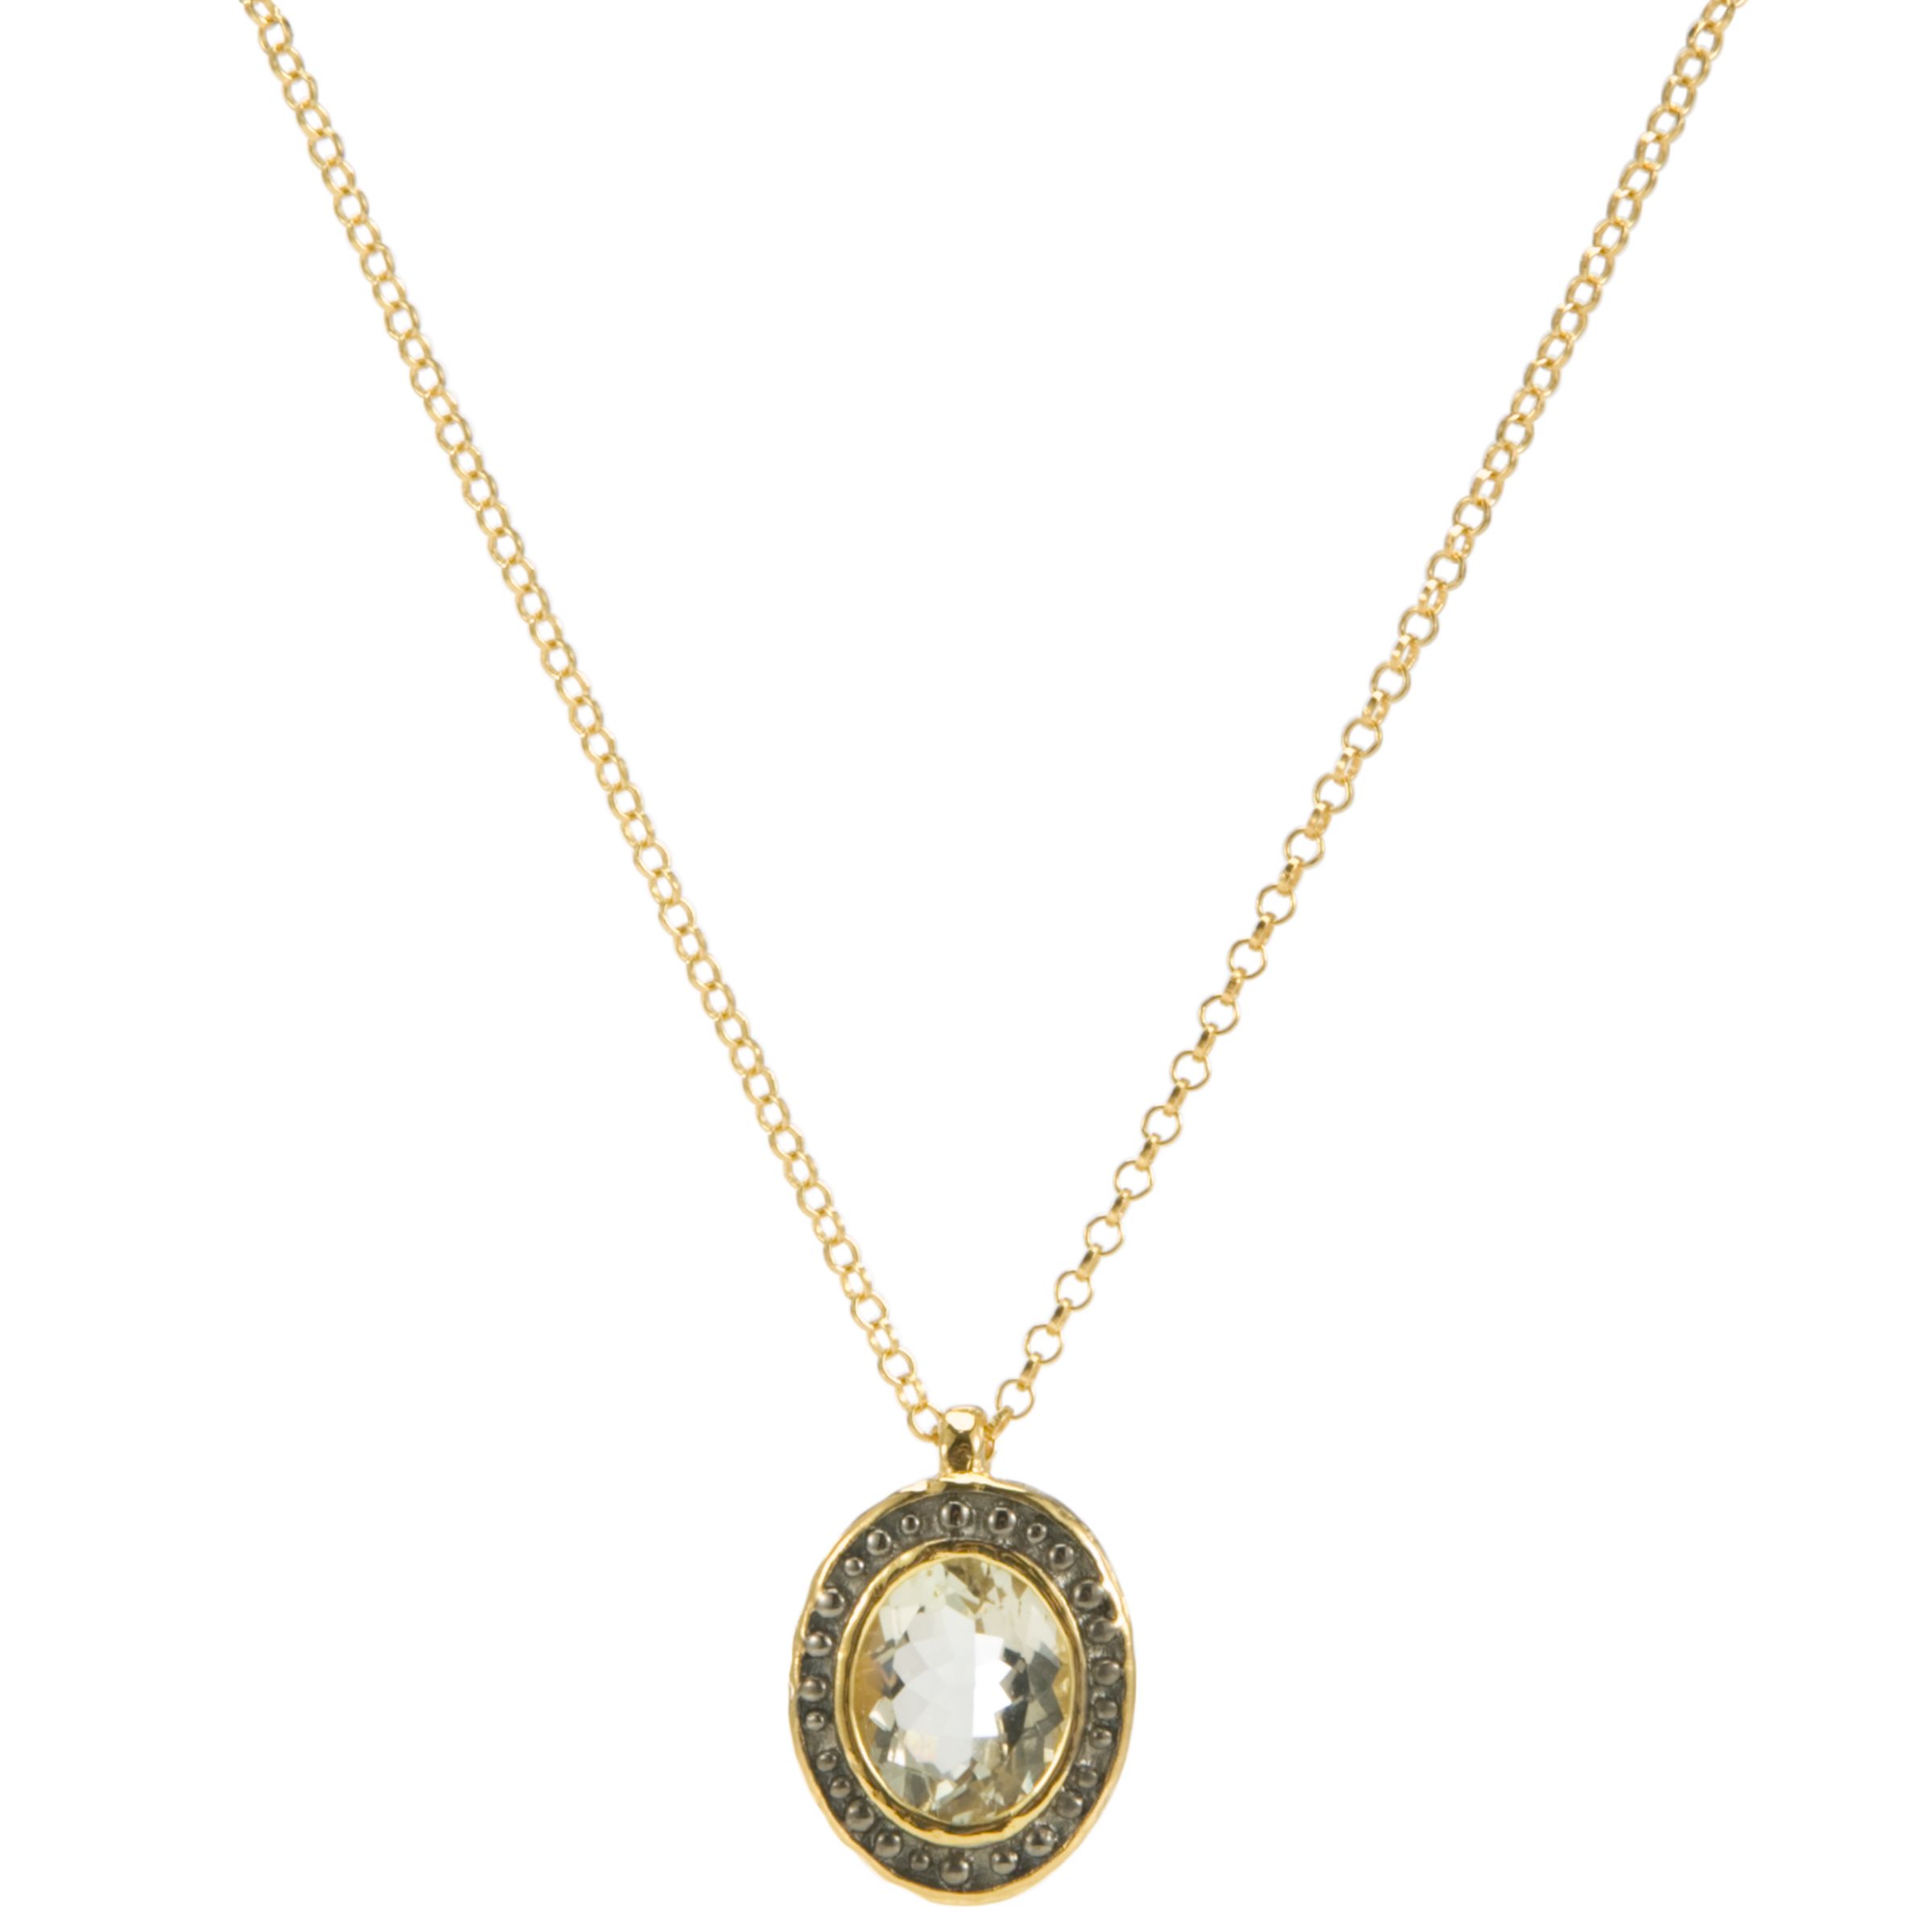 Etrusca 18ct Gold Plated Bead Encircled Gemstone Pendant Necklace